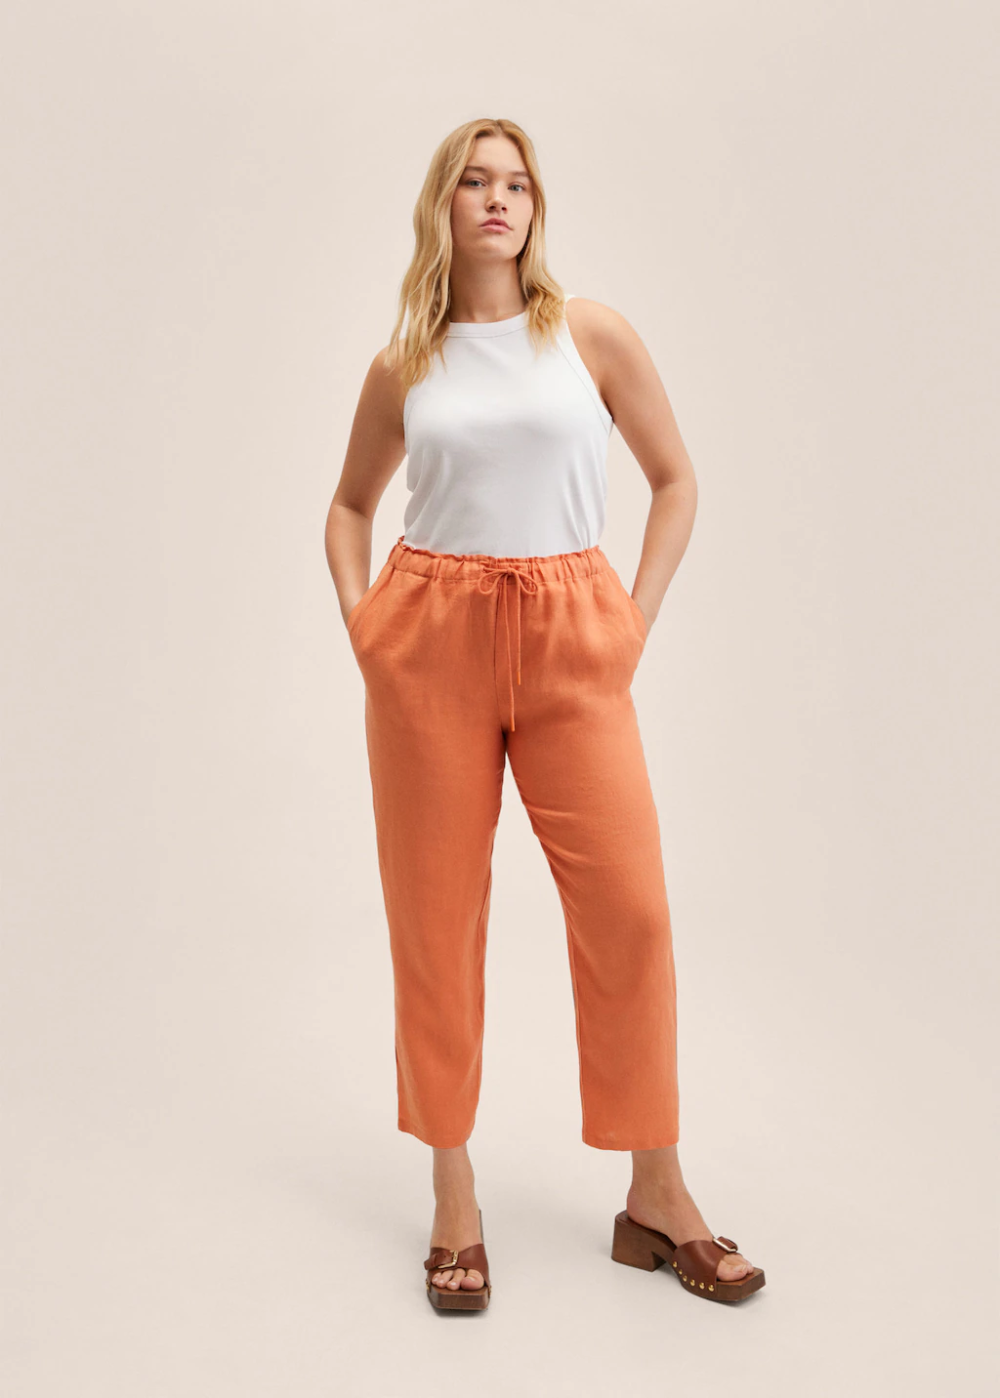 Best Linen Pants 2023  Forbes Vetted